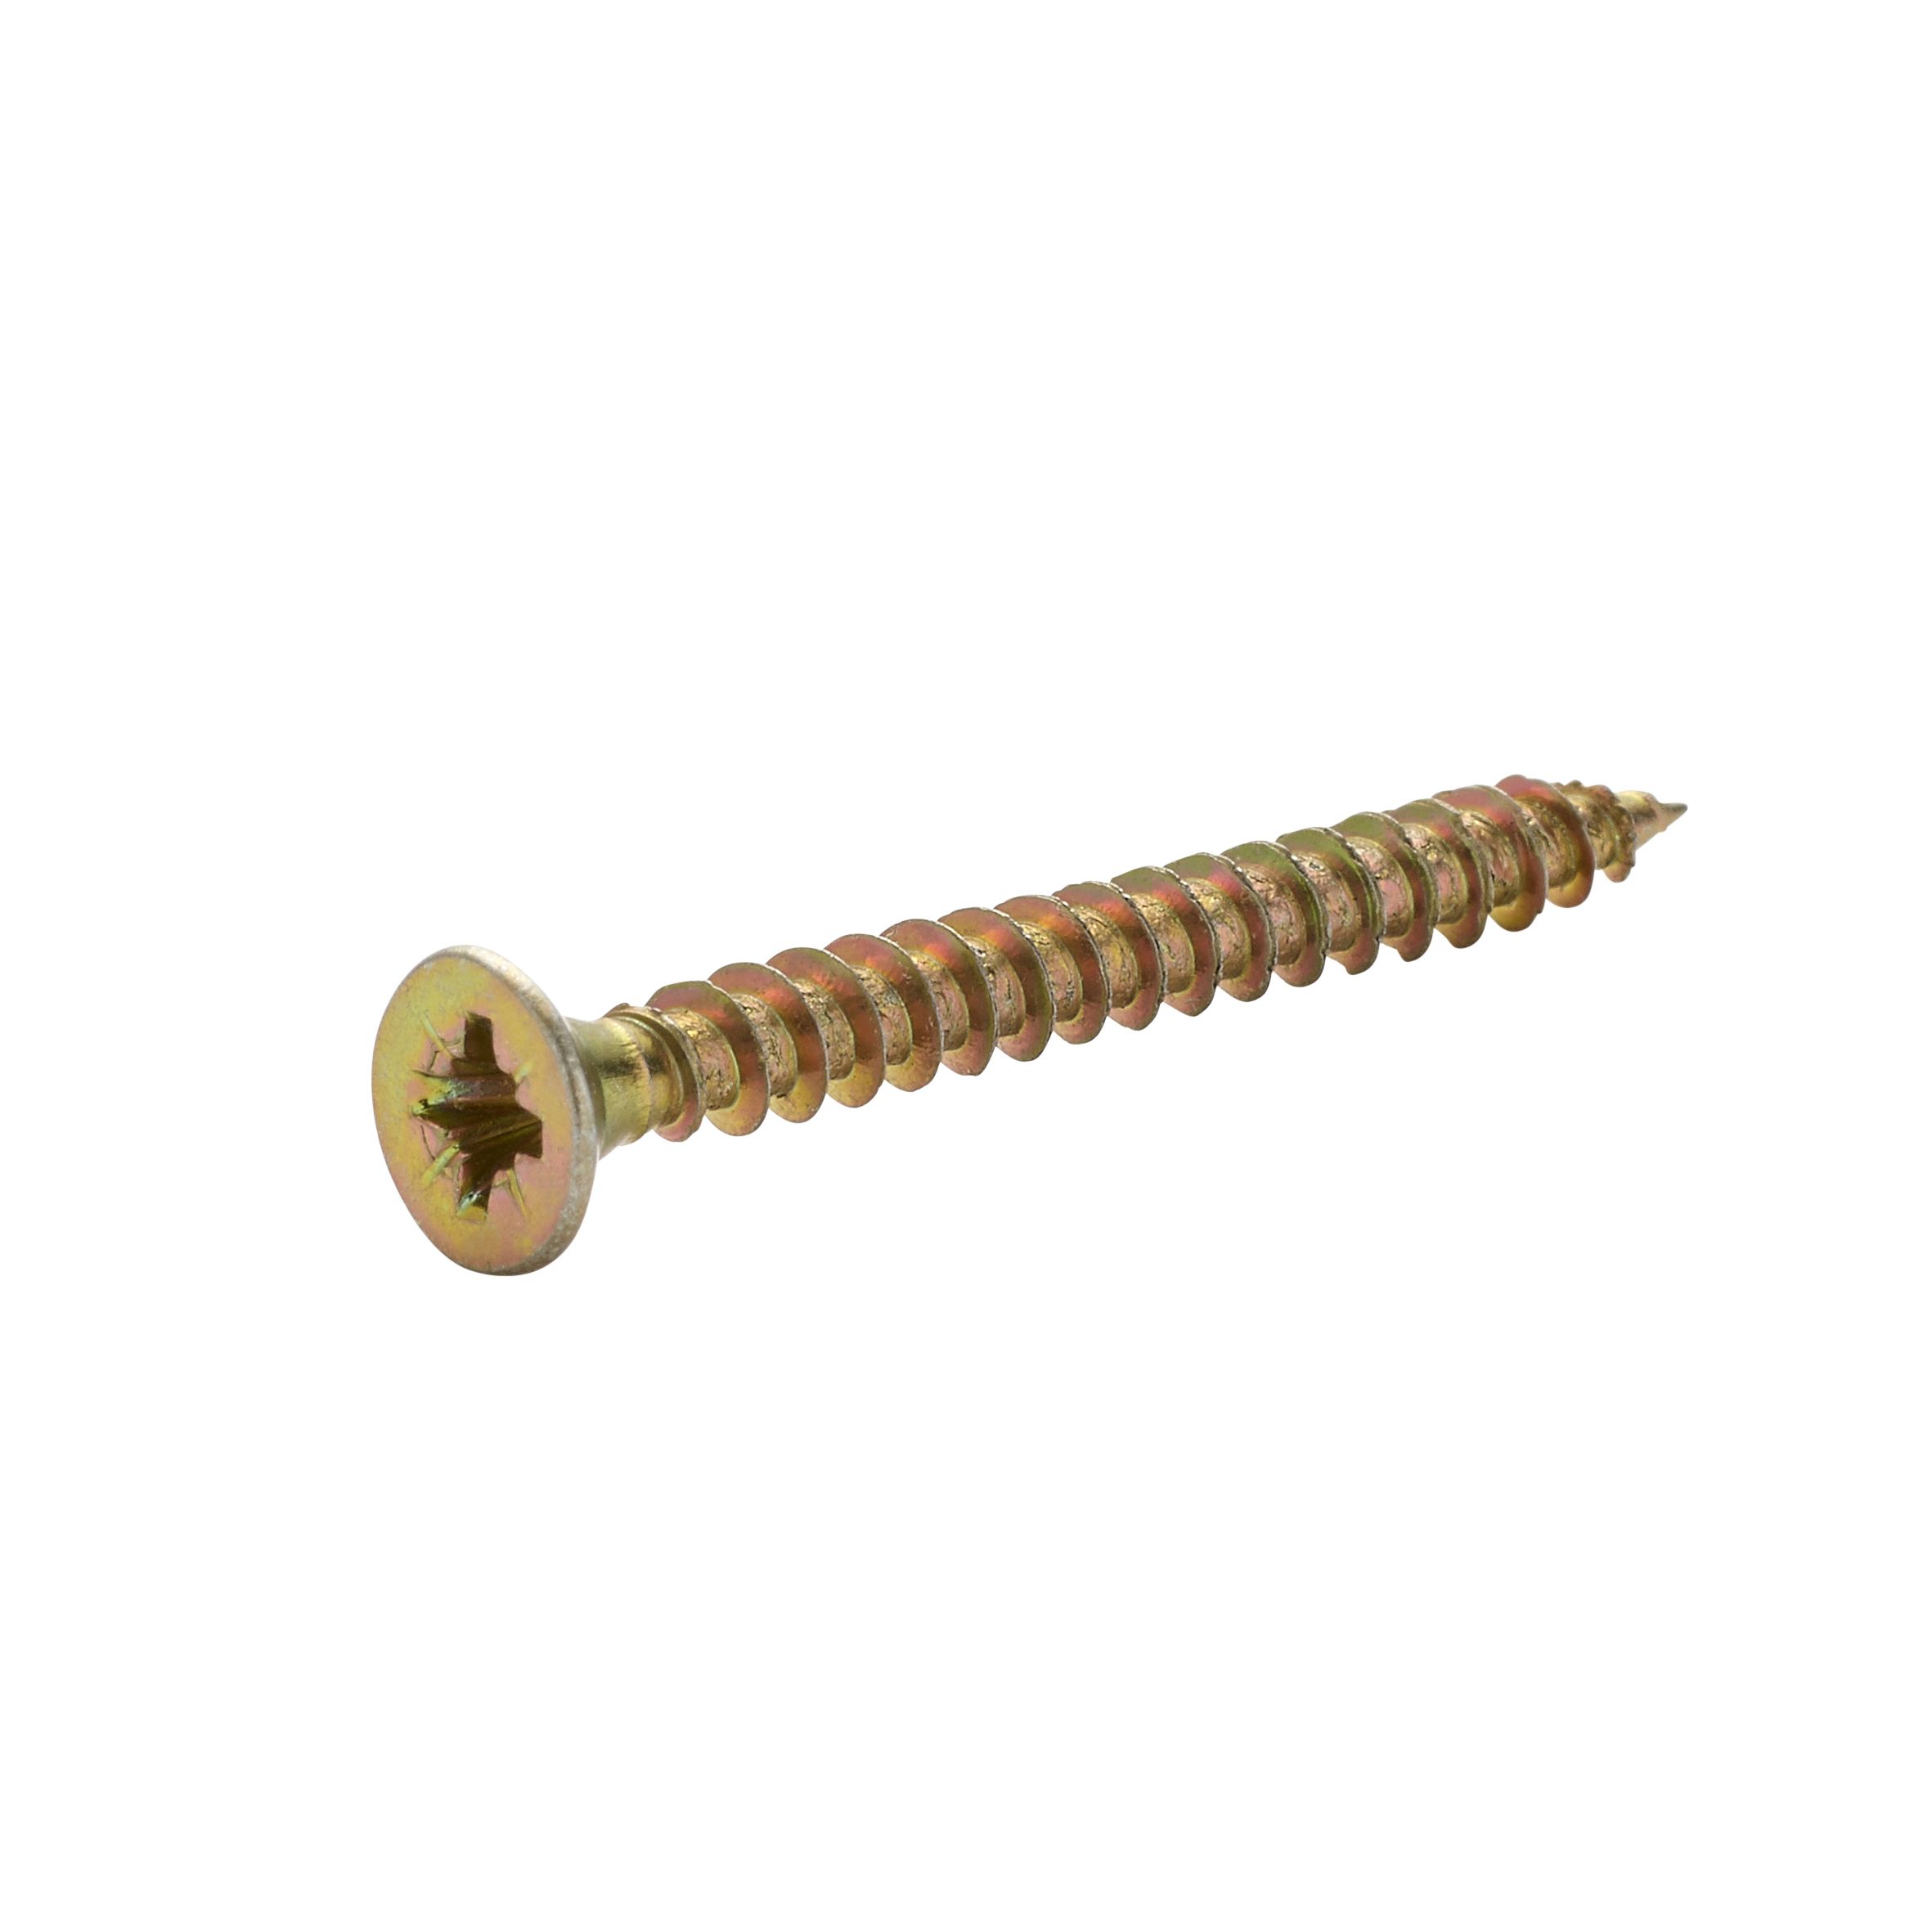 Diall Yellow-passivated Carbon steel Screw (Dia)3mm (L)30mm, Pack of 100